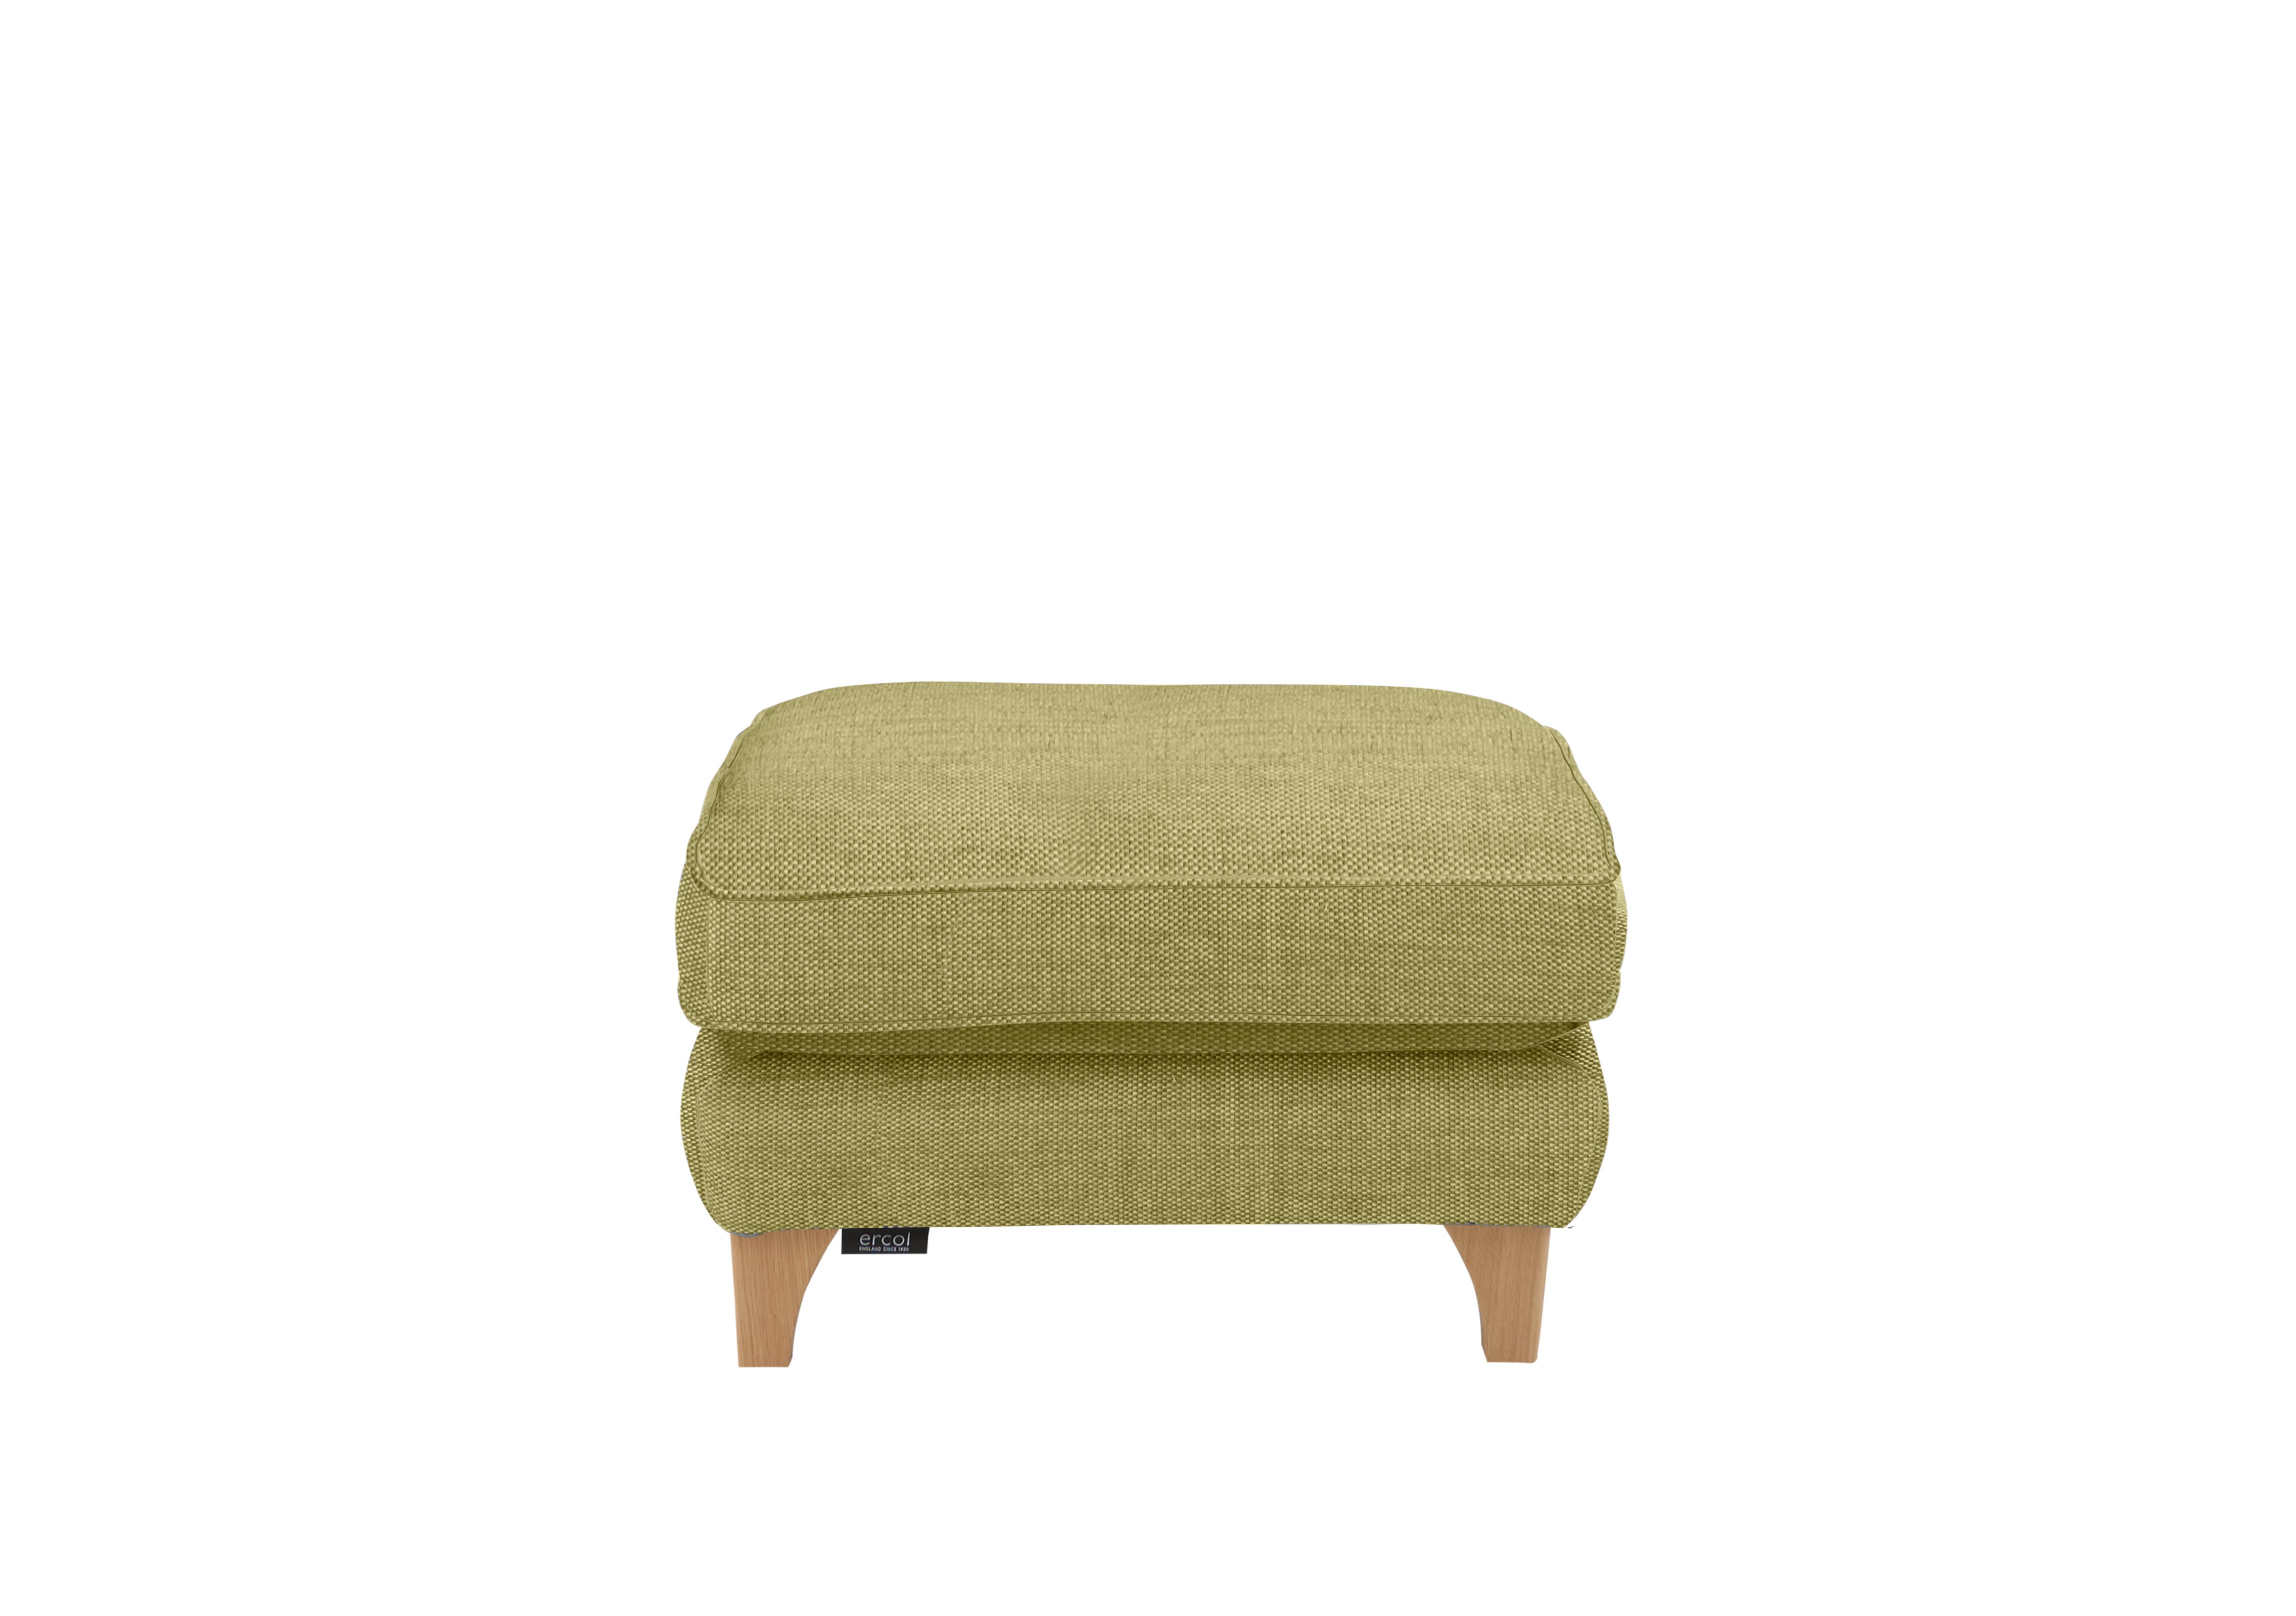 Enna Fabric Footstool in P220 on Furniture Village